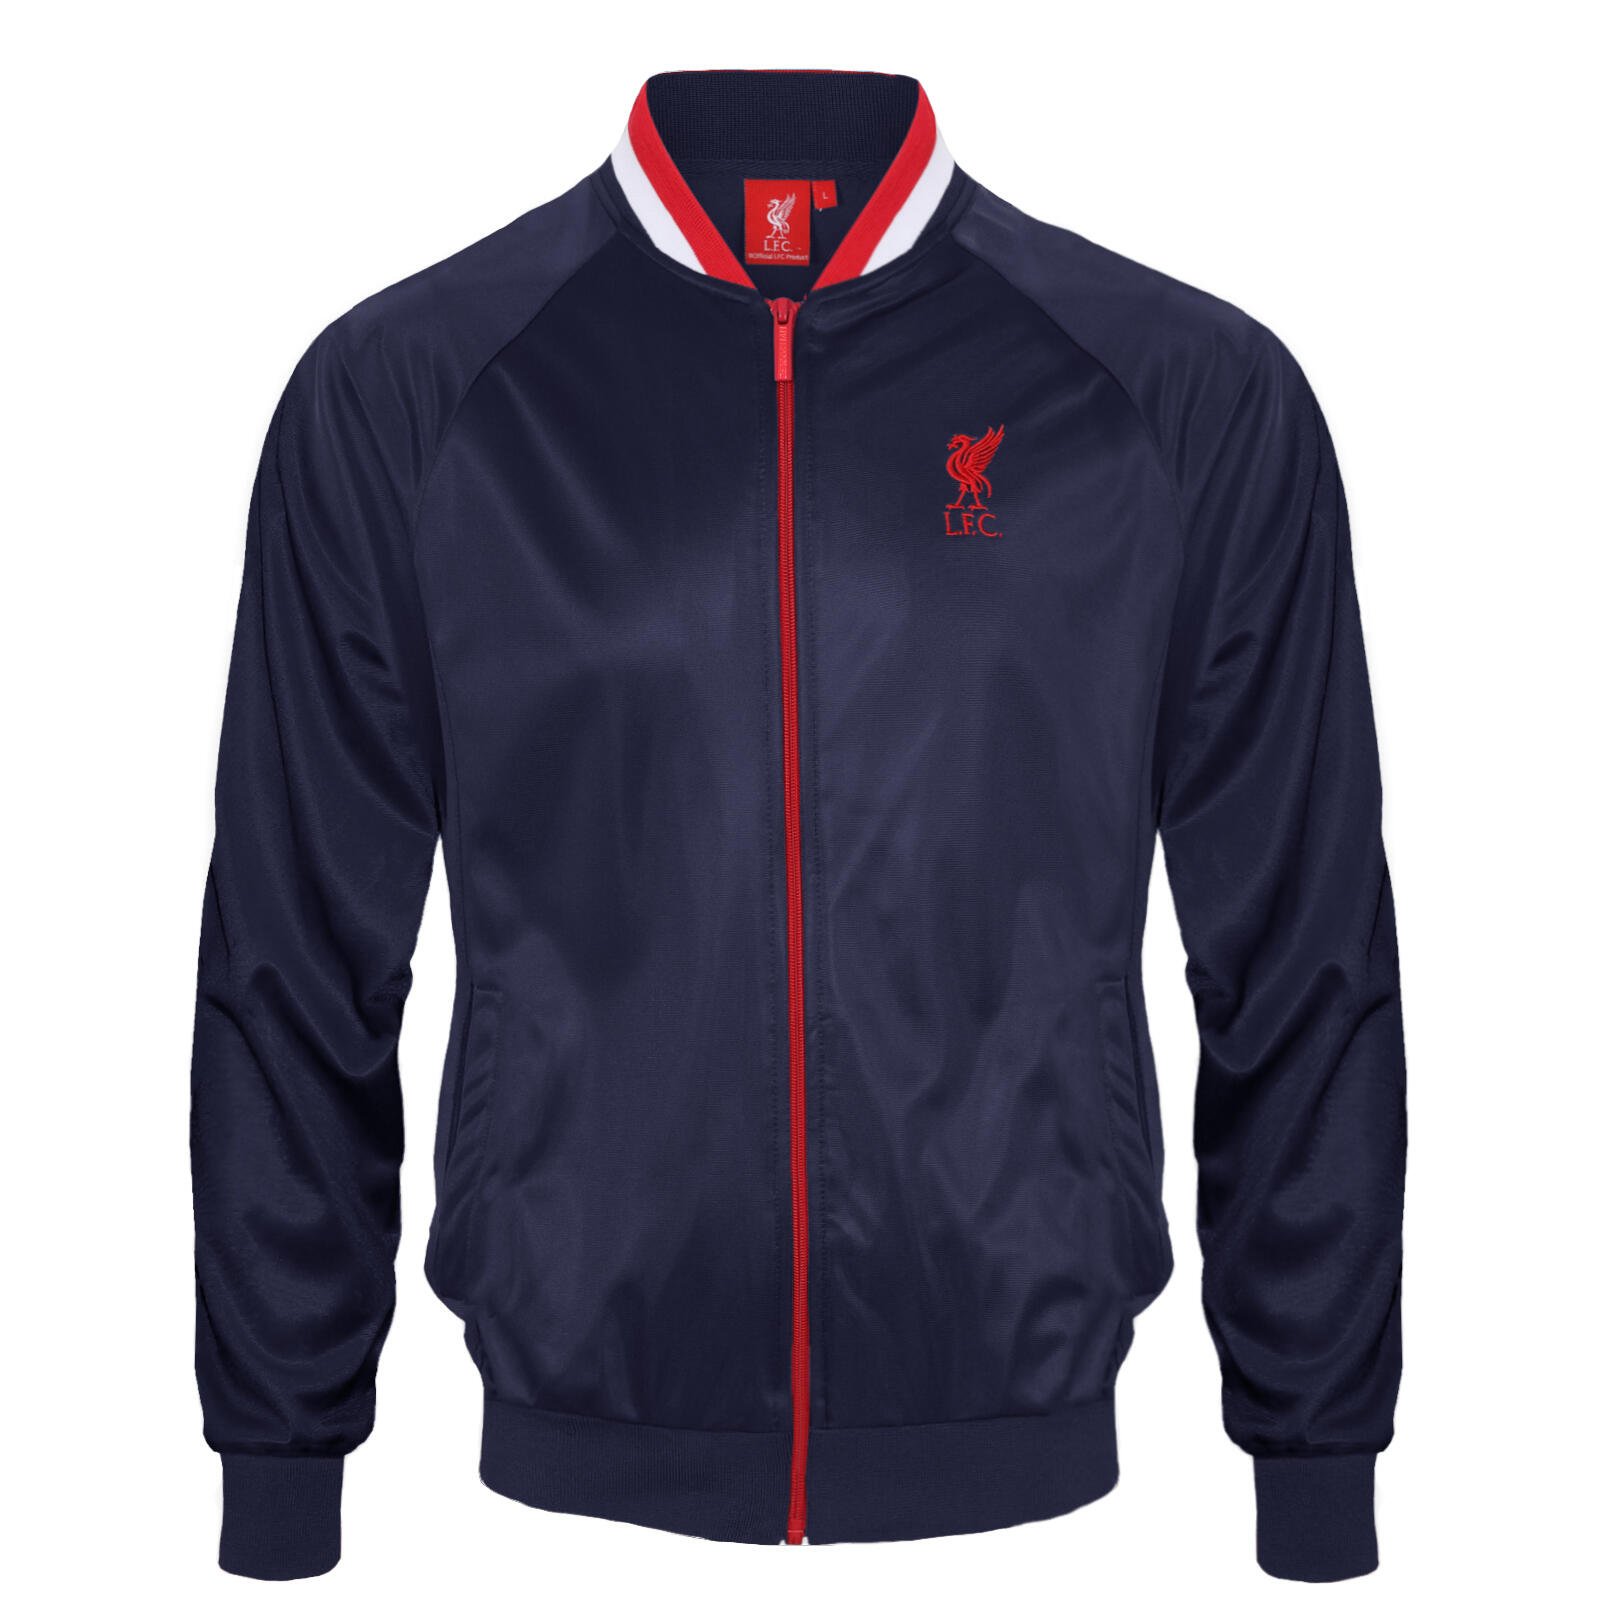 LIVERPOOL FC Liverpool FC Mens Jacket Track Top Retro OFFICIAL Football Gift